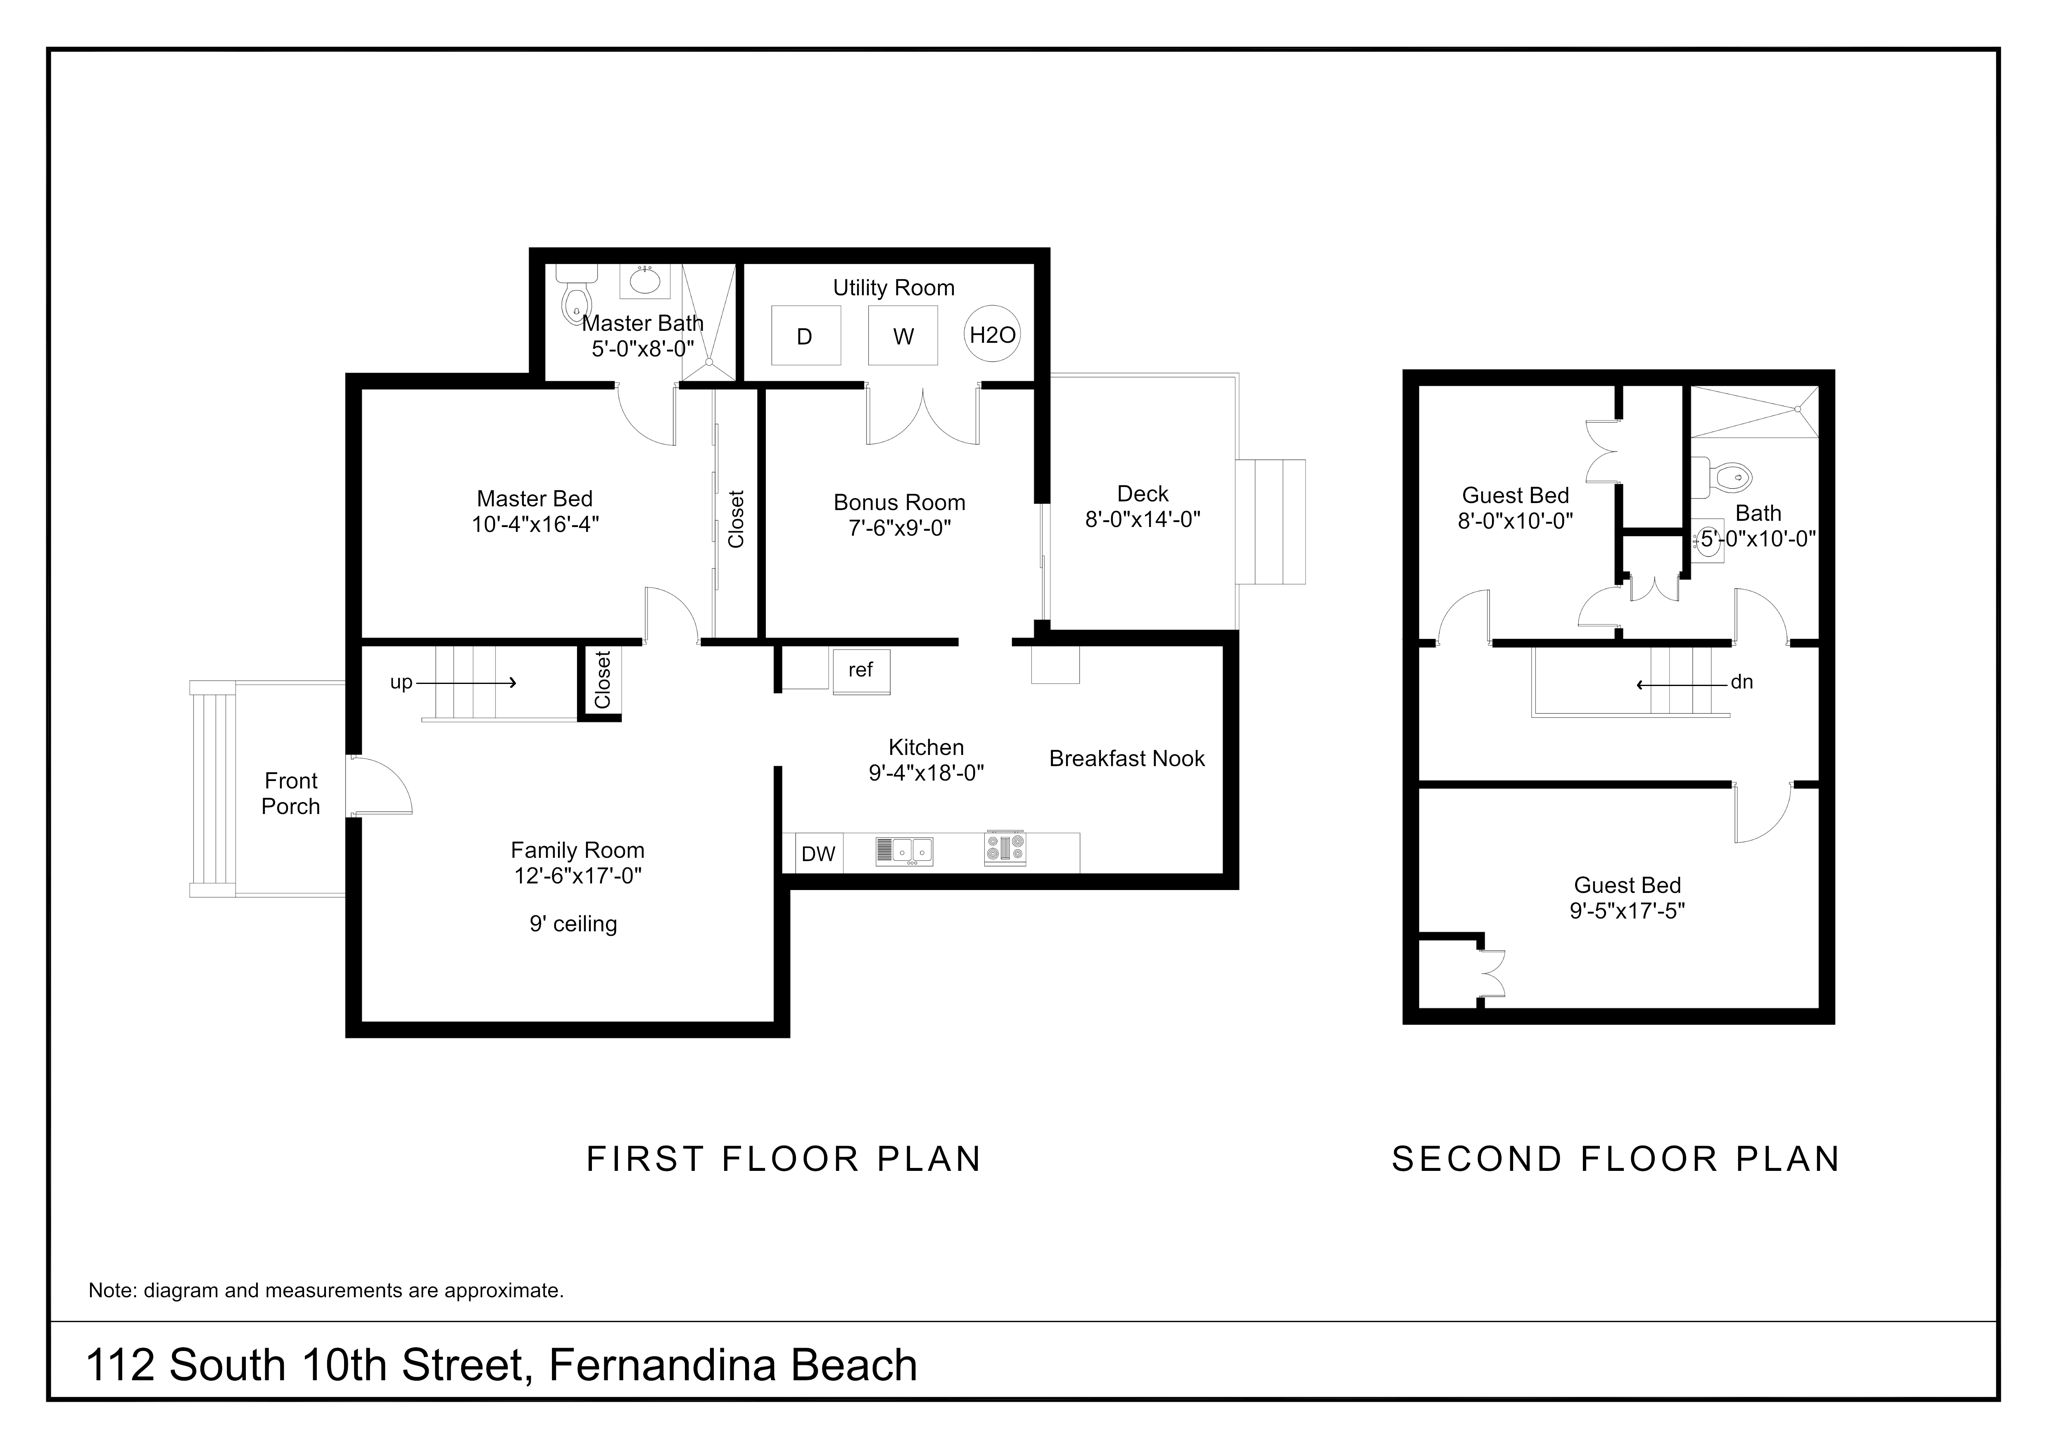 A functional and flowing floorplan